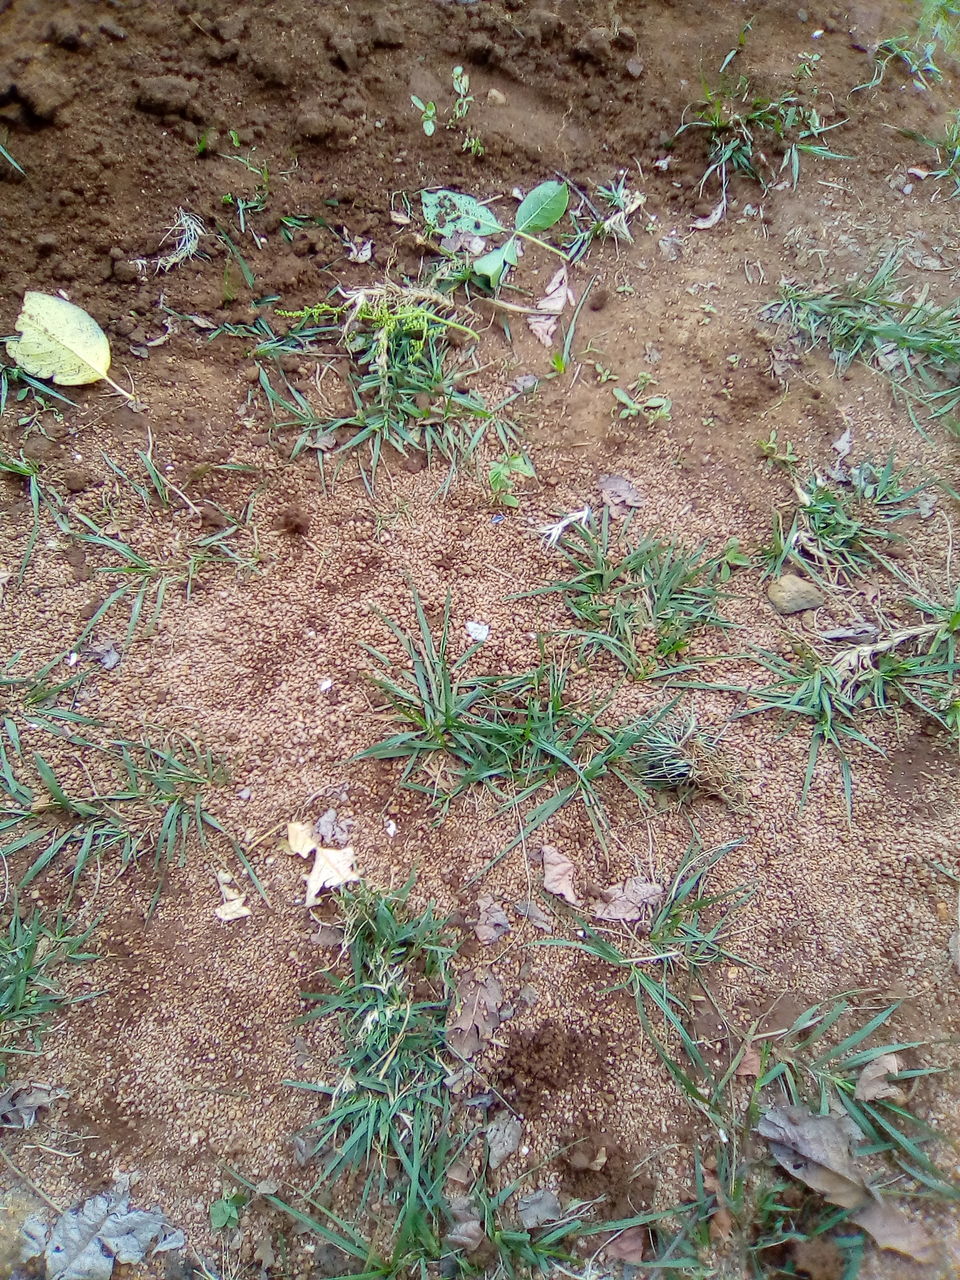 soil, plant, no people, land, high angle view, day, nature, grass, field, growth, outdoors, green, flower, lawn, plant part, dirt, leaf, woodland, garden